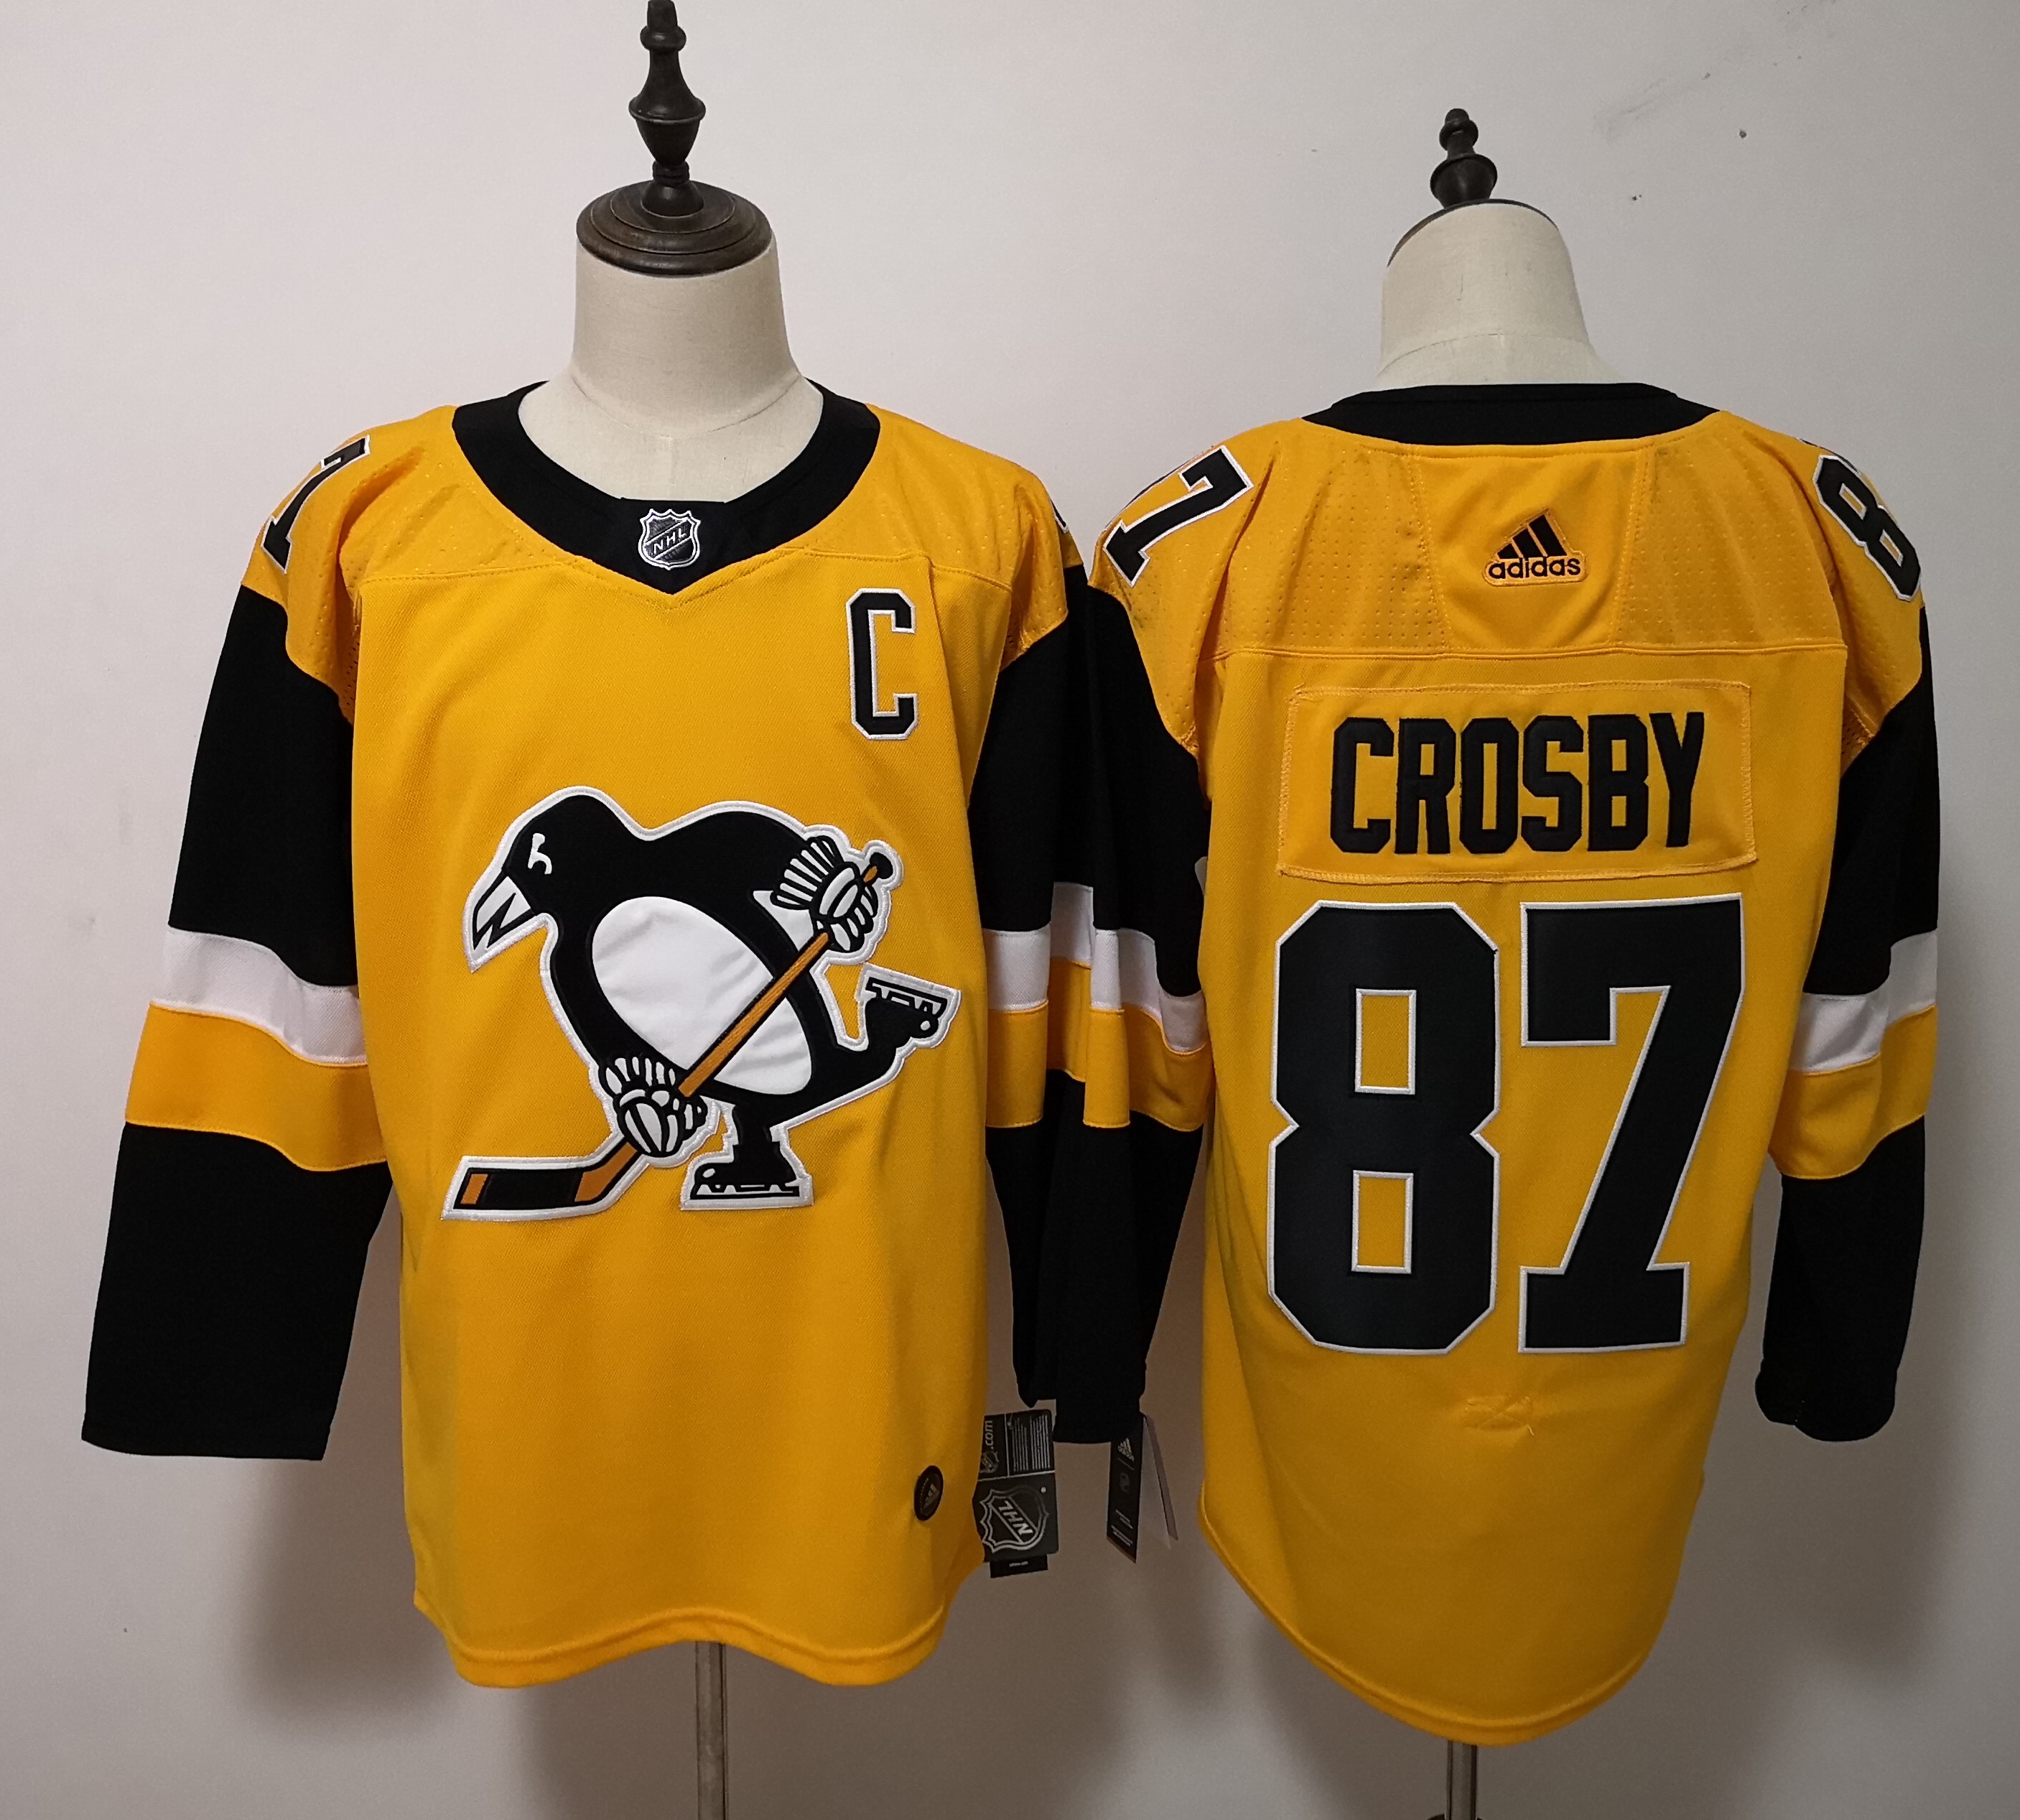 Adidas Men Pittsburgh Penguins 87 Sidney Crosby Yellow Alternate Stitched NHL Jersey